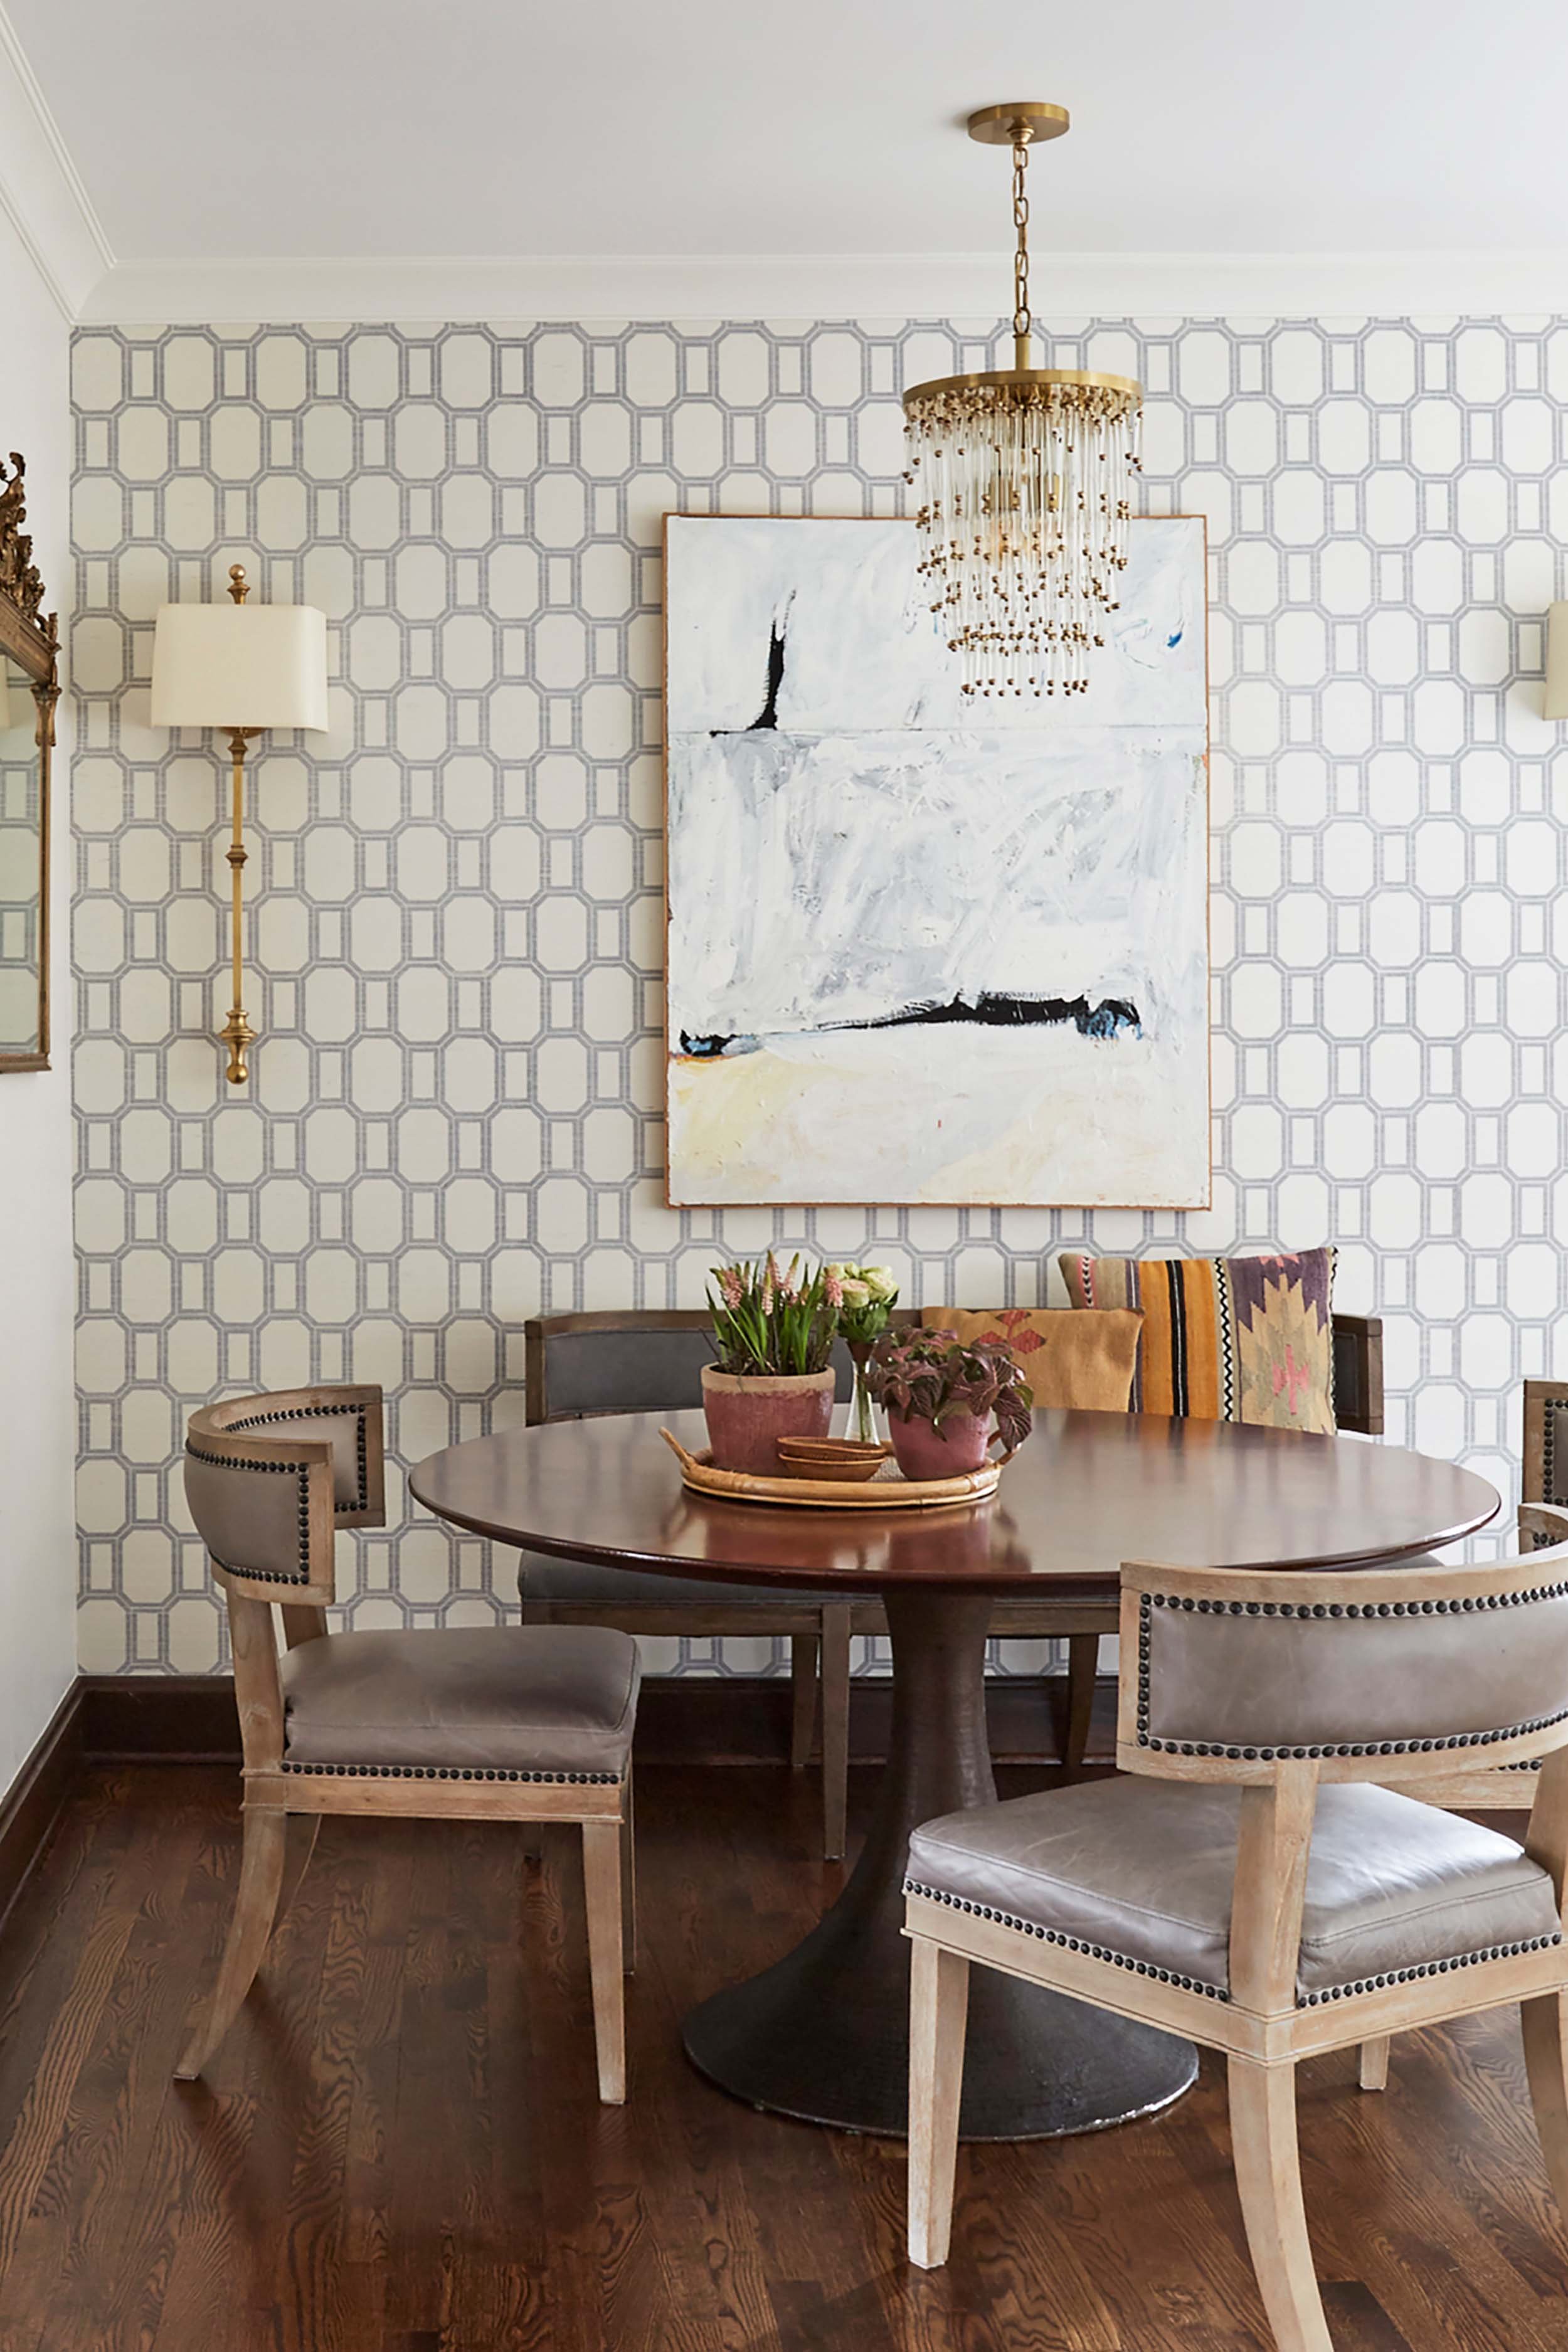 Dining nook with a chandelier, gorgeous chairs and patterned wallpaper